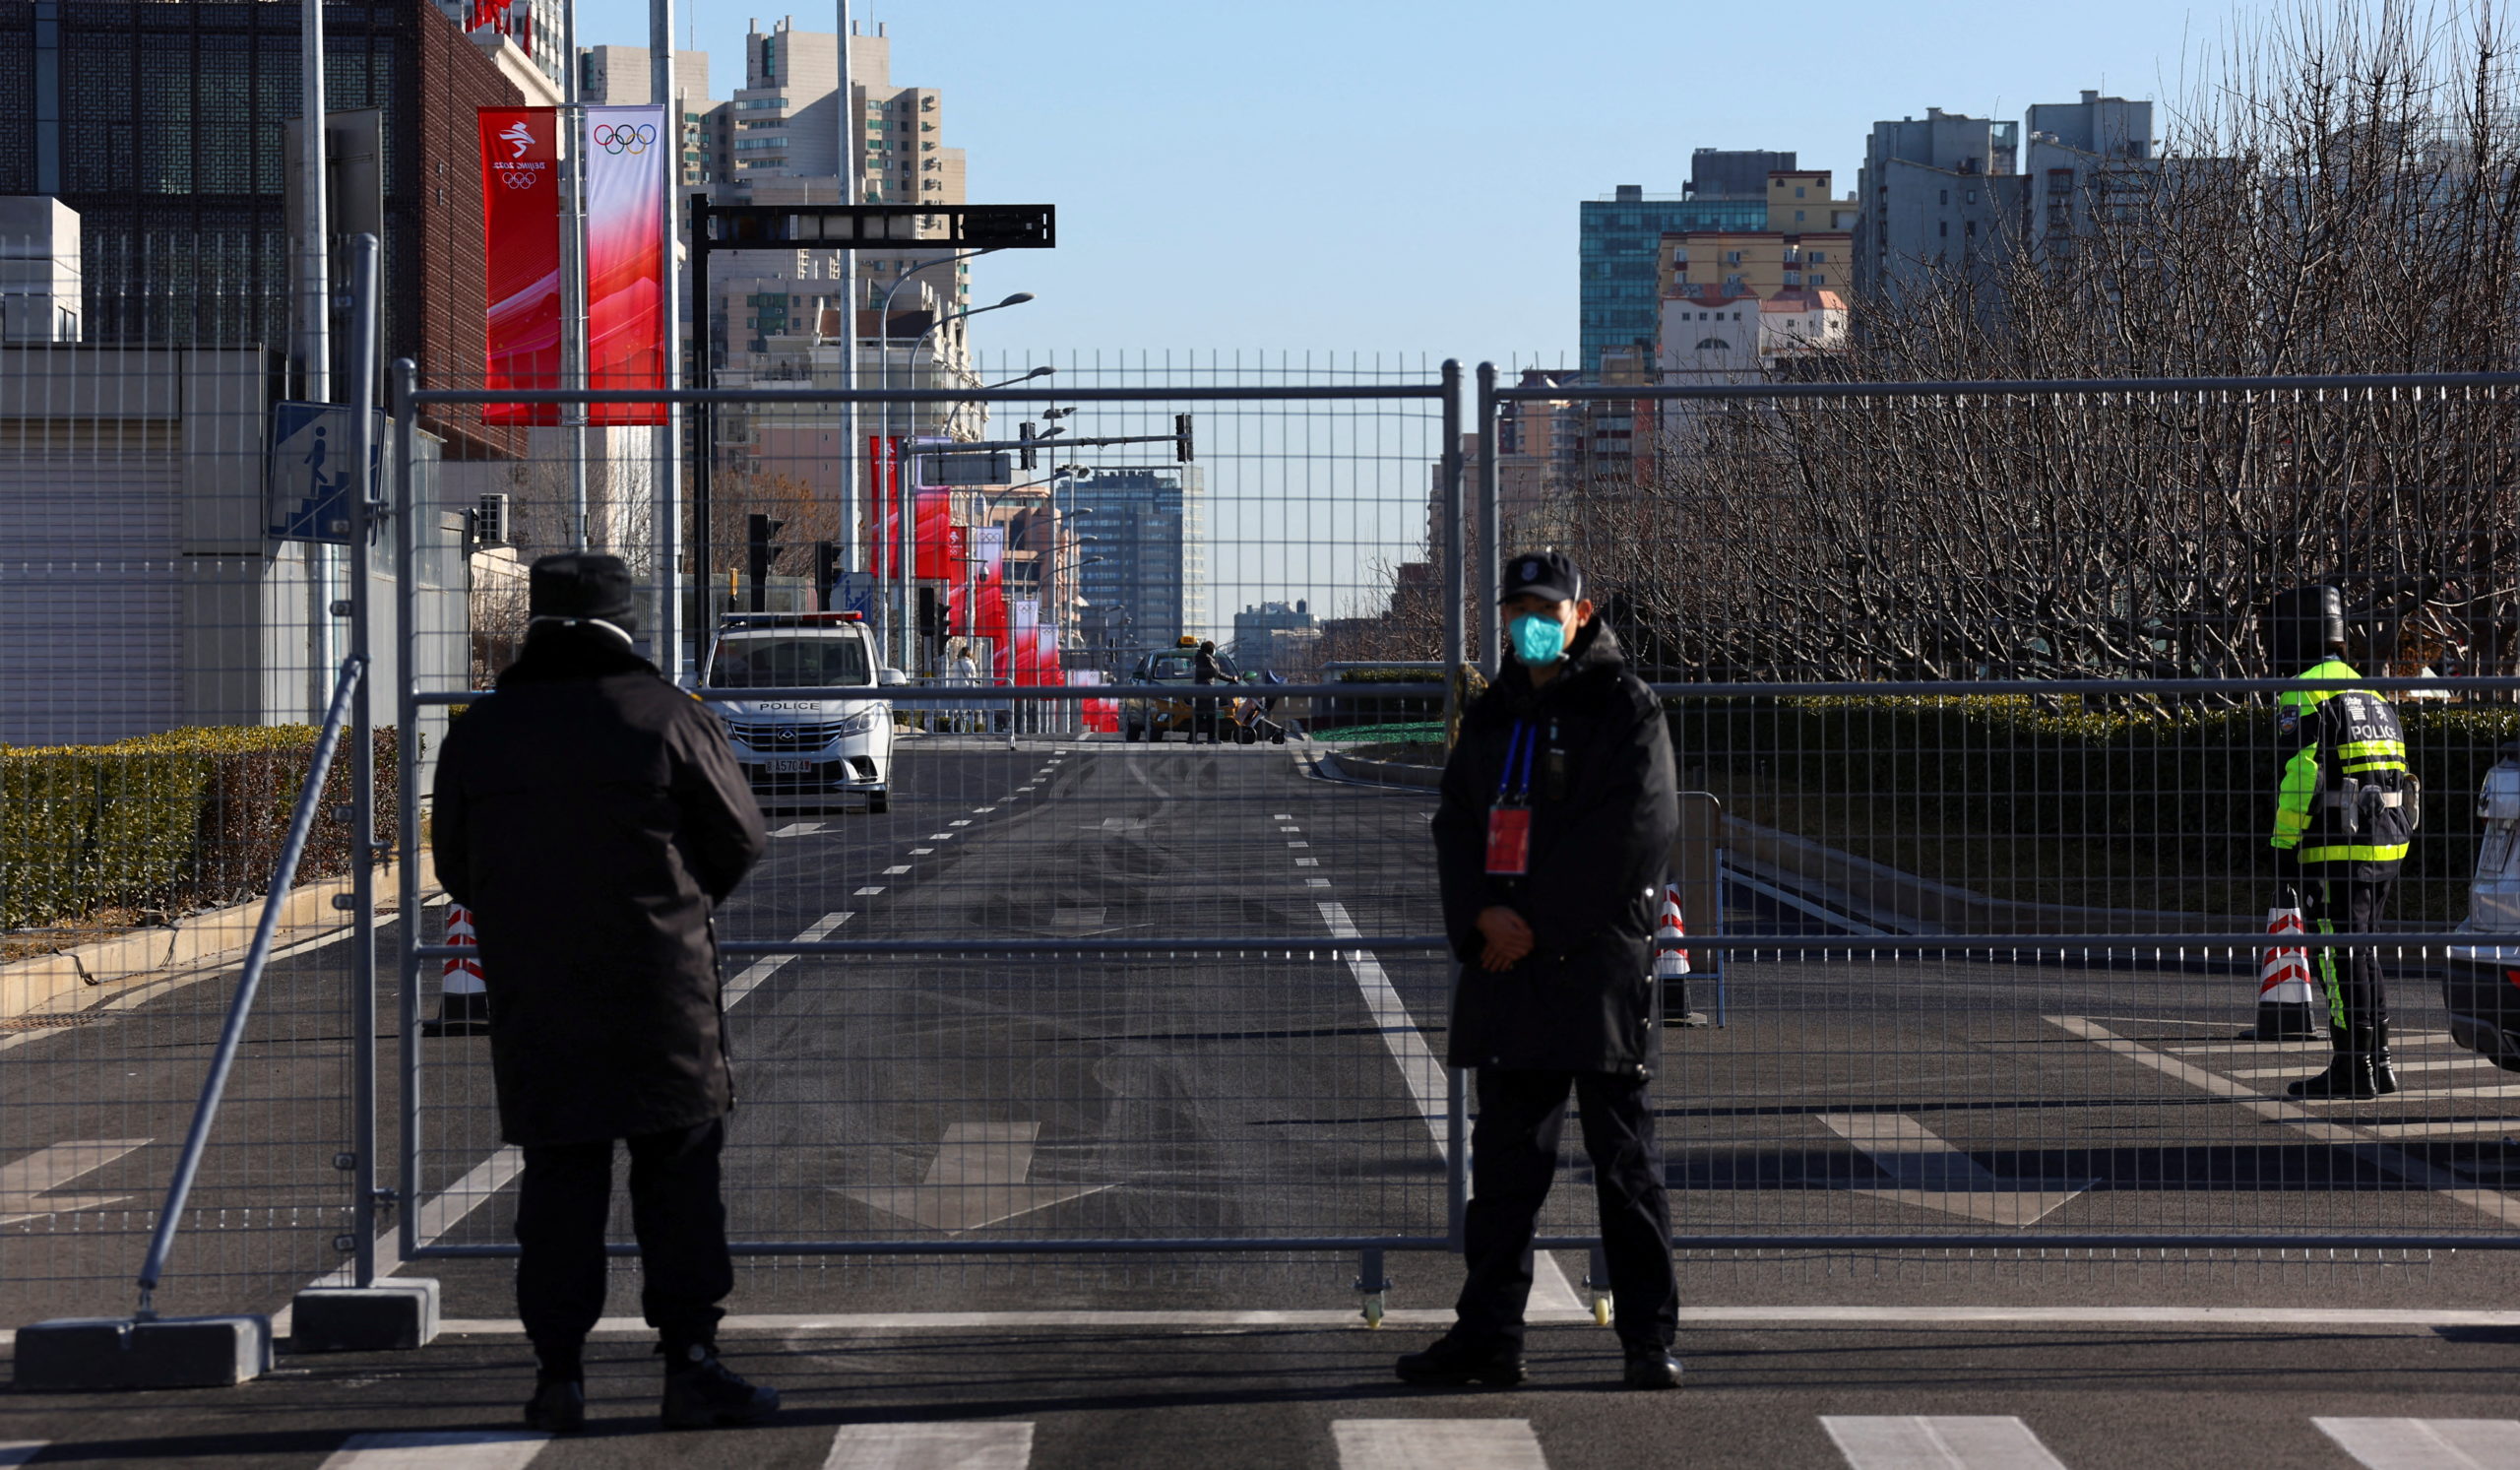 Security staff stand guard inside a closed loop area designed to prevent the spread of the coronavirus disease (COVID-19) ahead of the Beijing 2022 Winter Olympics in Beijing, China January 13, 2022.